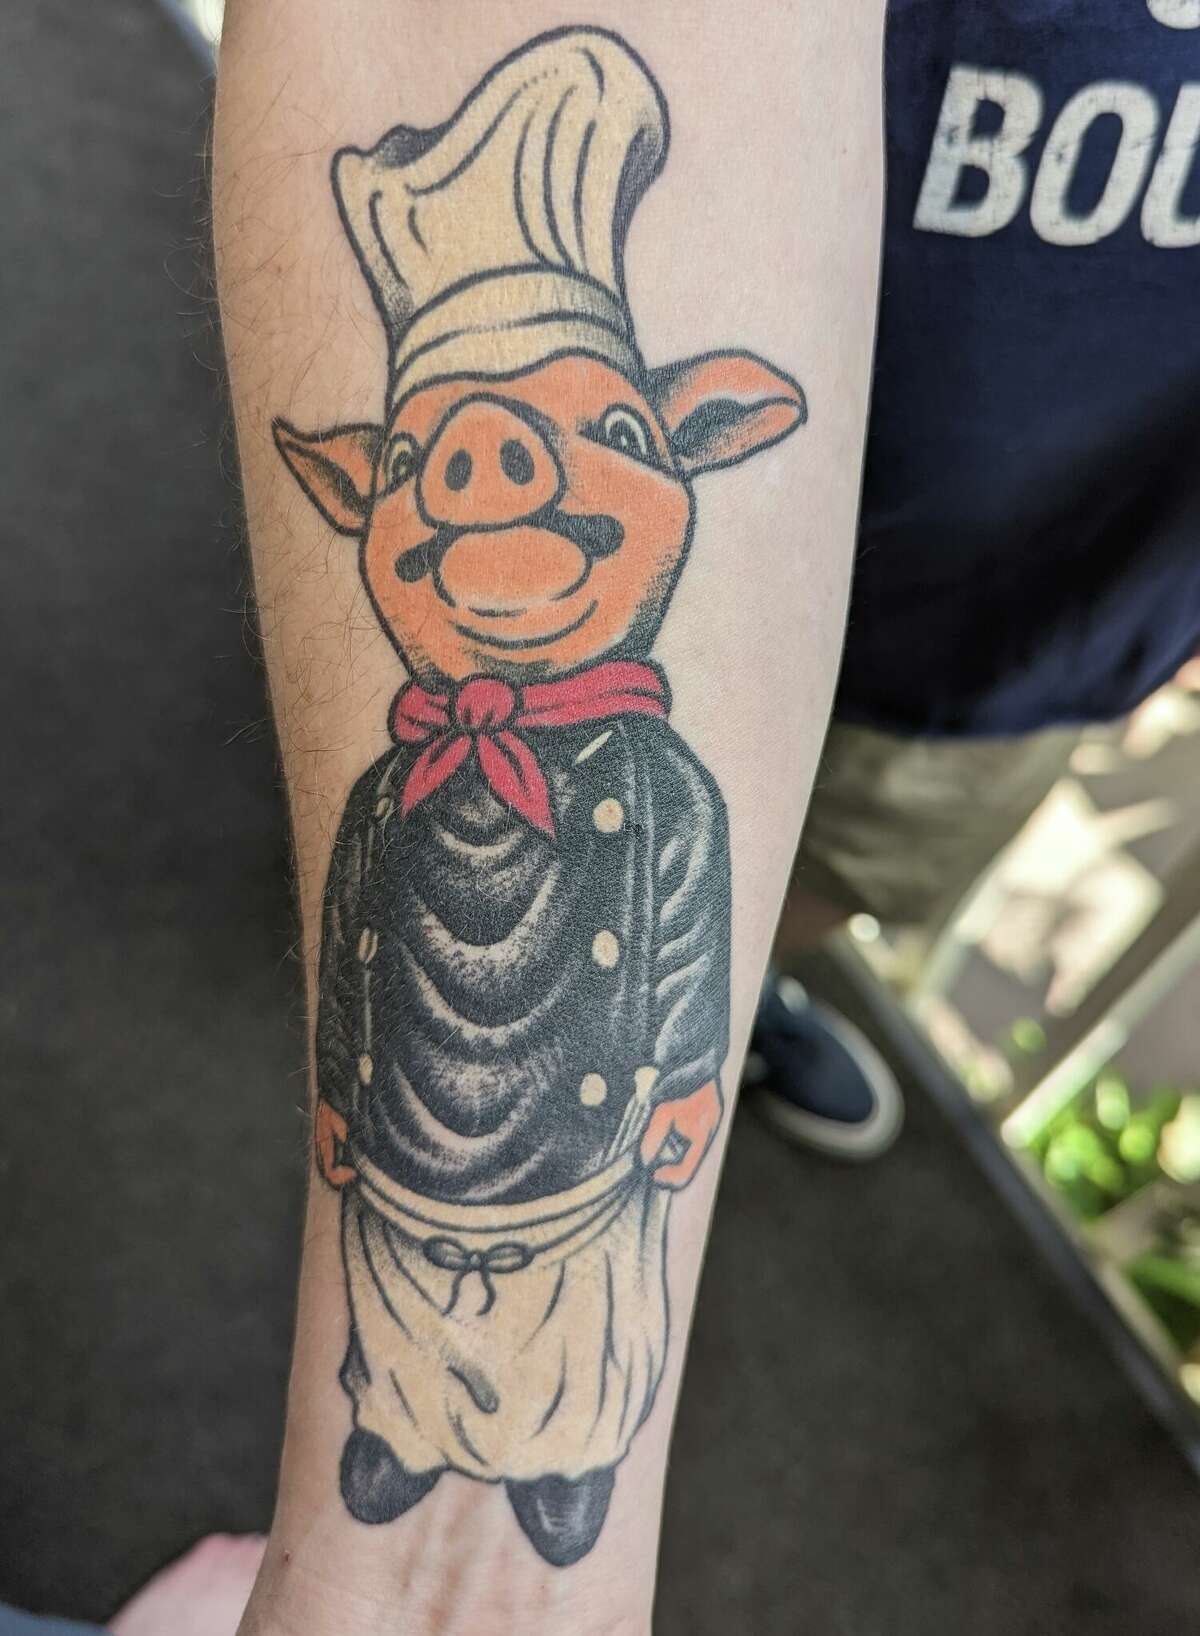 Mark "Piglet" Pignone leaned into his nickname with a pig tattoo.